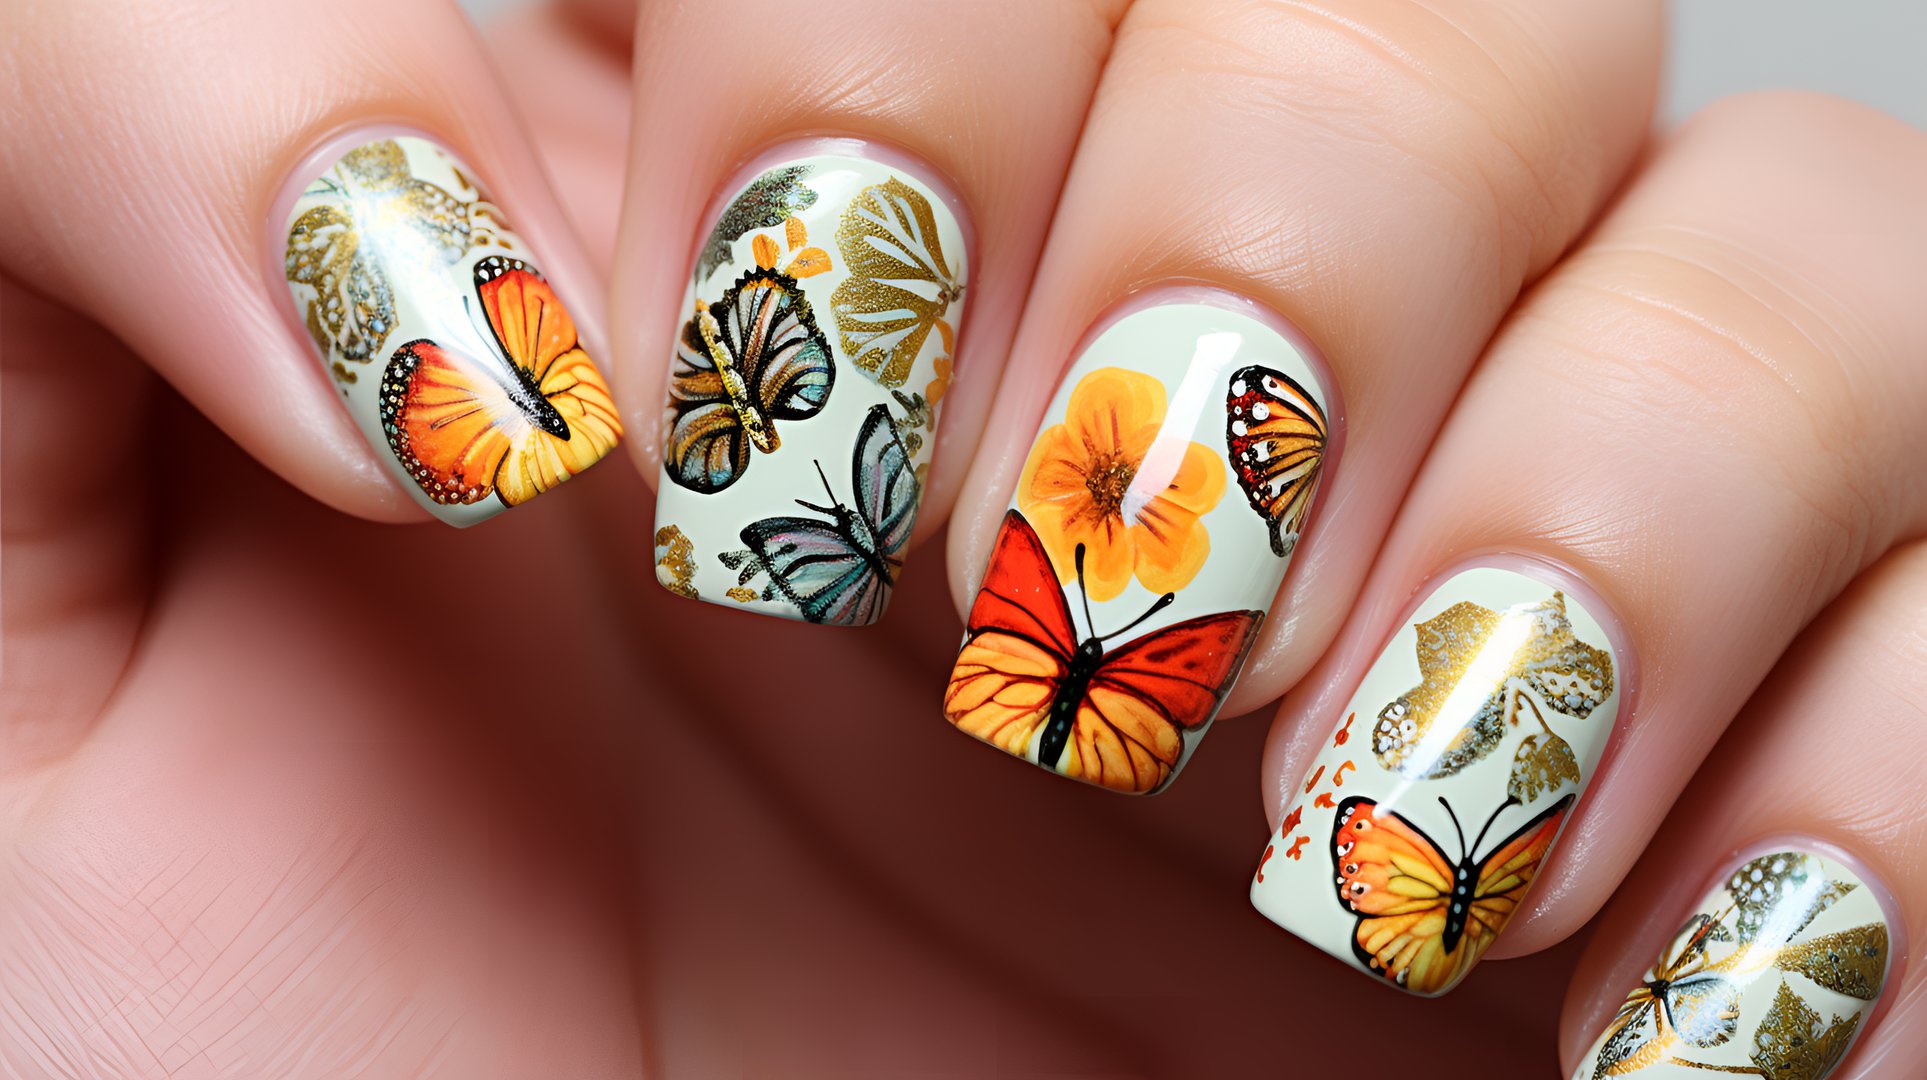 Butterfly Nail Art: How to Create Sugar Coat Nails with Butterflies? eBook  by Tanya Angelova - EPUB Book | Rakuten Kobo United States